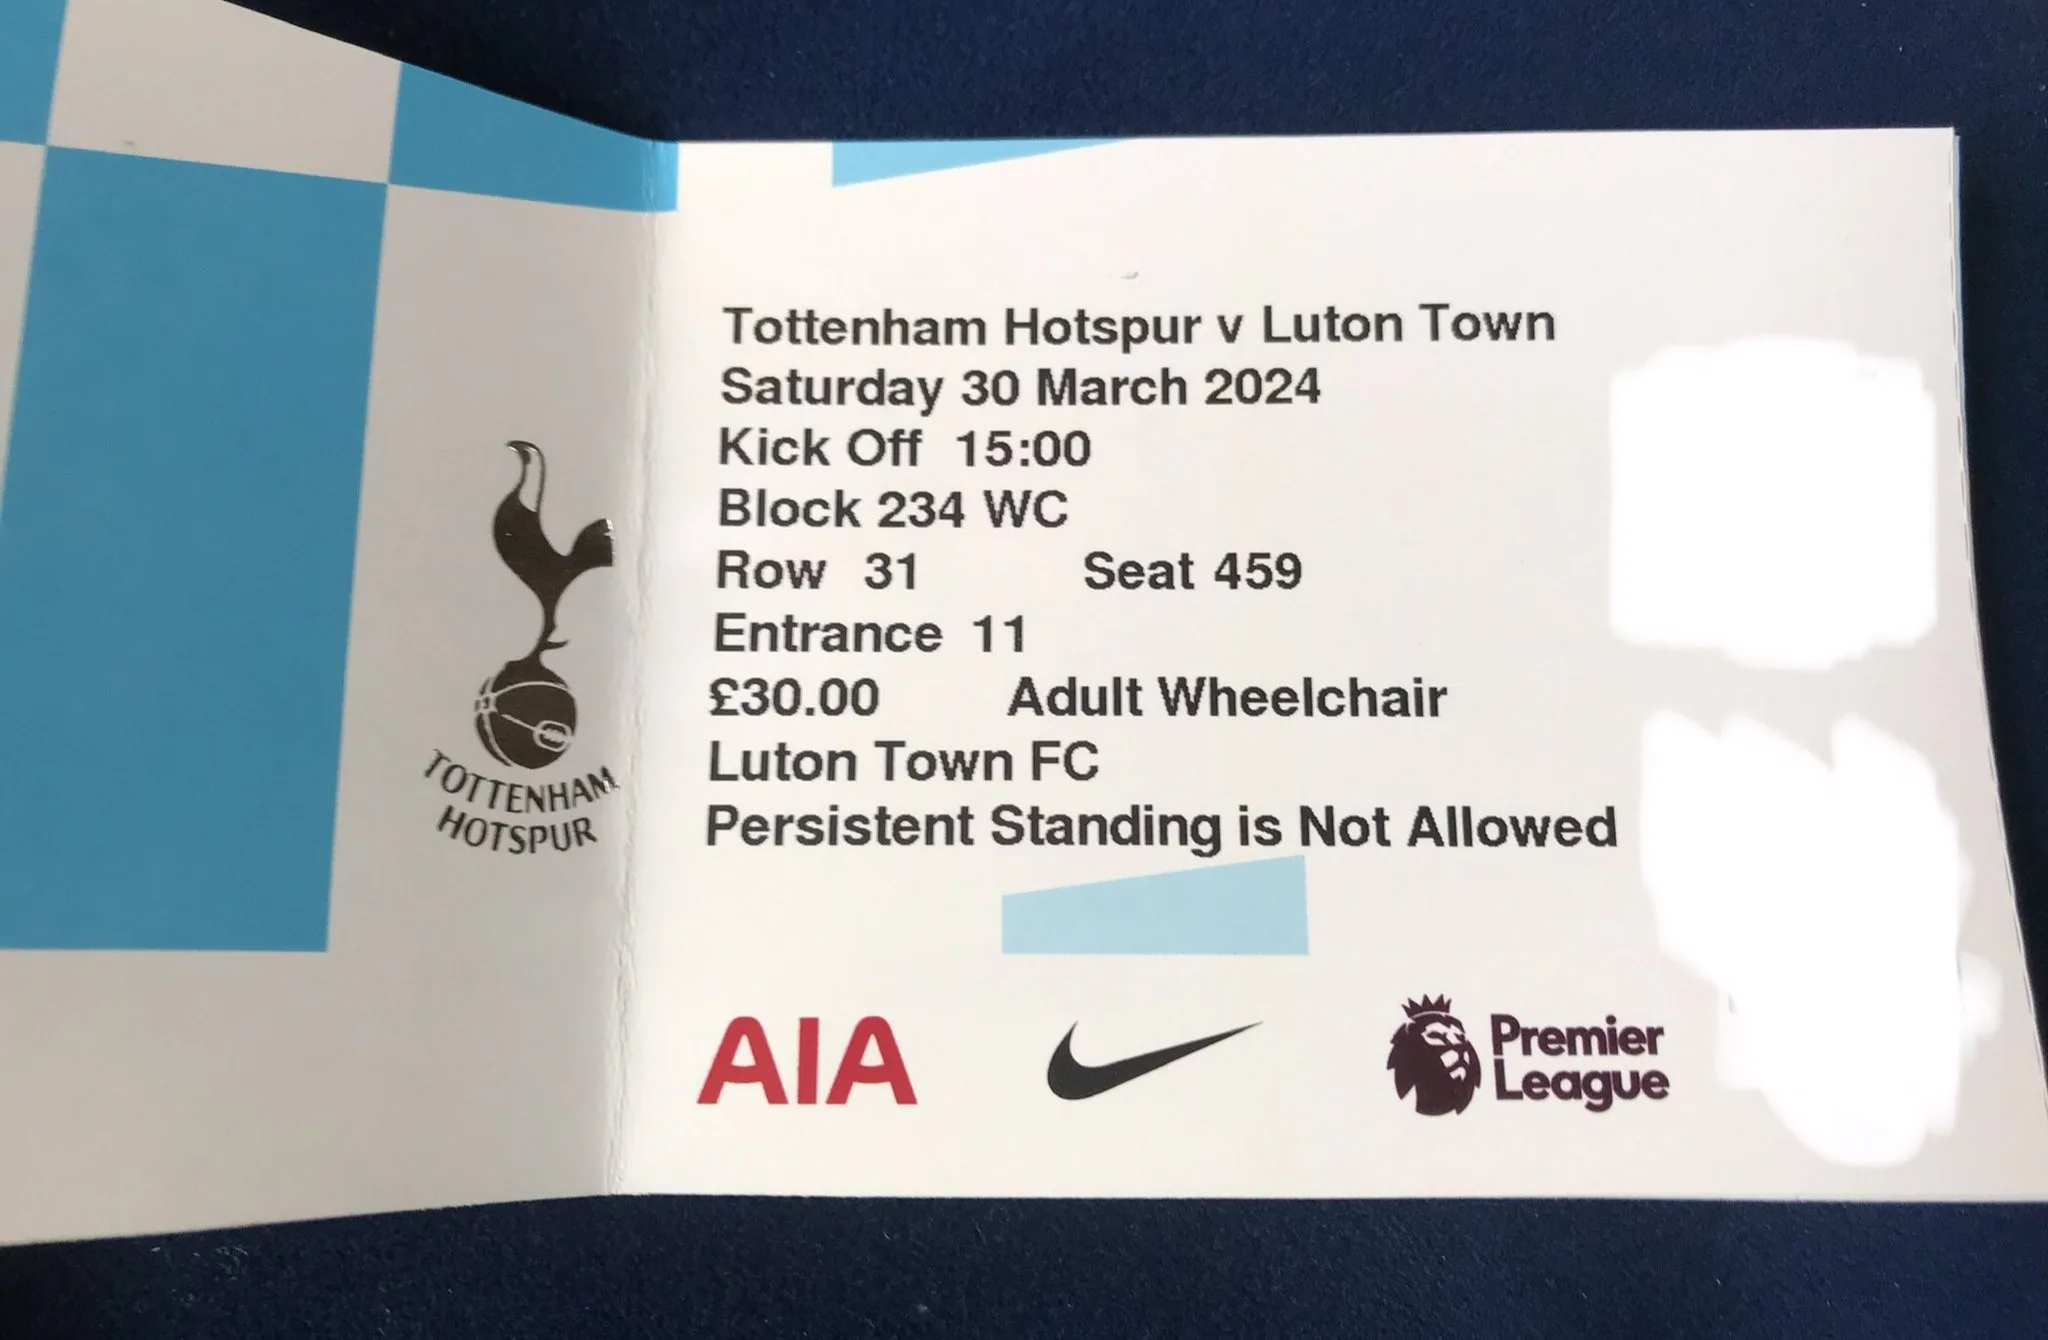 A wheelchair-bound Luton fan was surprised when his Tottenham ticket warned against "persistent standing," despite being for a "wheelchair adult." Spurs supporters and football fans shared mixed reactions to the blunder, with some finding humor in the situation.